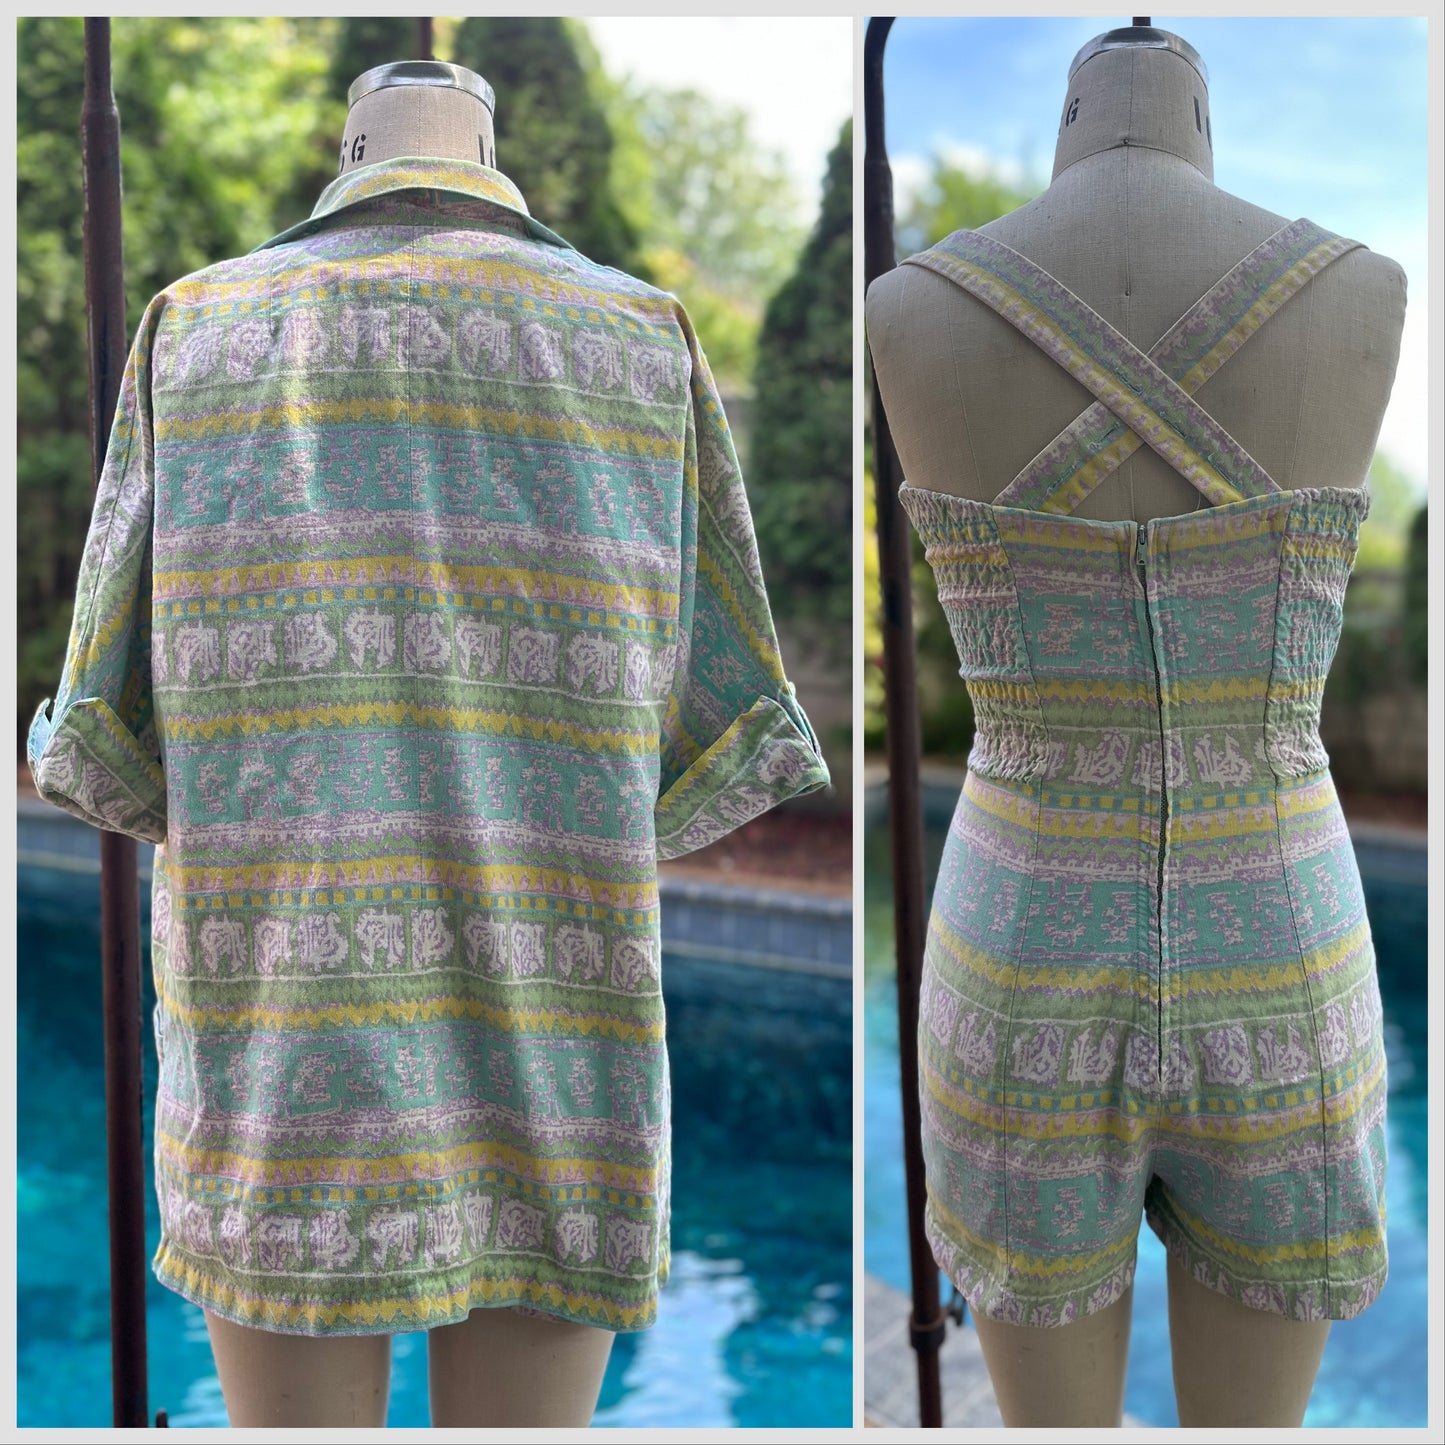 1950s Pastel Stripe Romper and Cover-Up, Rose Marie Reid Swimsuit Size XS, Playsuit and Beach Jacket